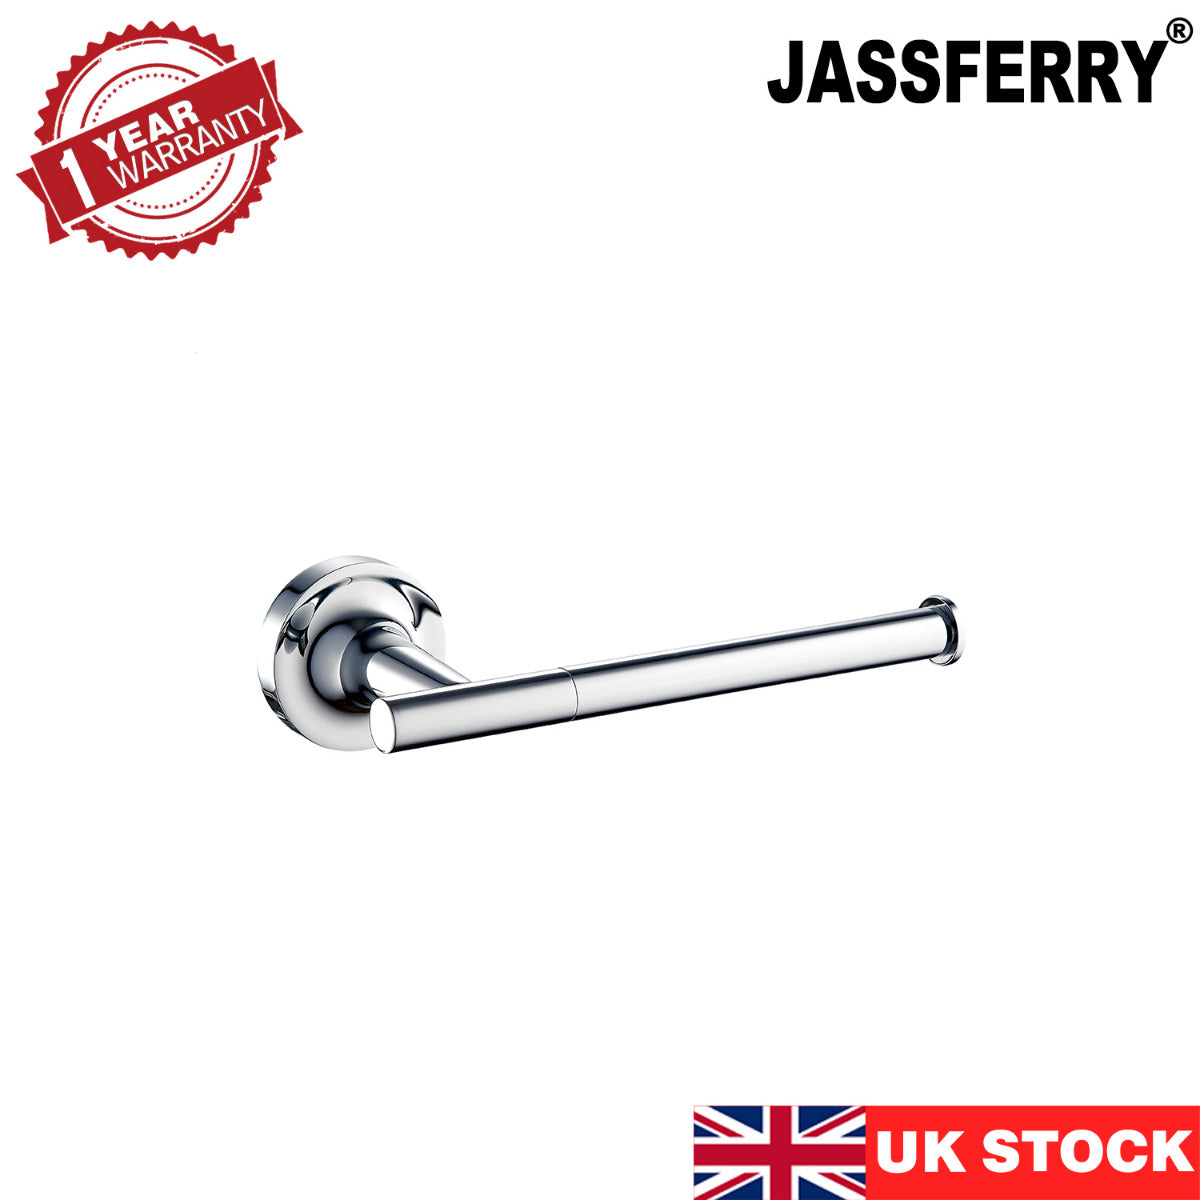 JassferryJASSFERRY Wall Mounted Toilet Paper Holders with Polished Chrome Roll Holder HorizontalToilet Paper Holders